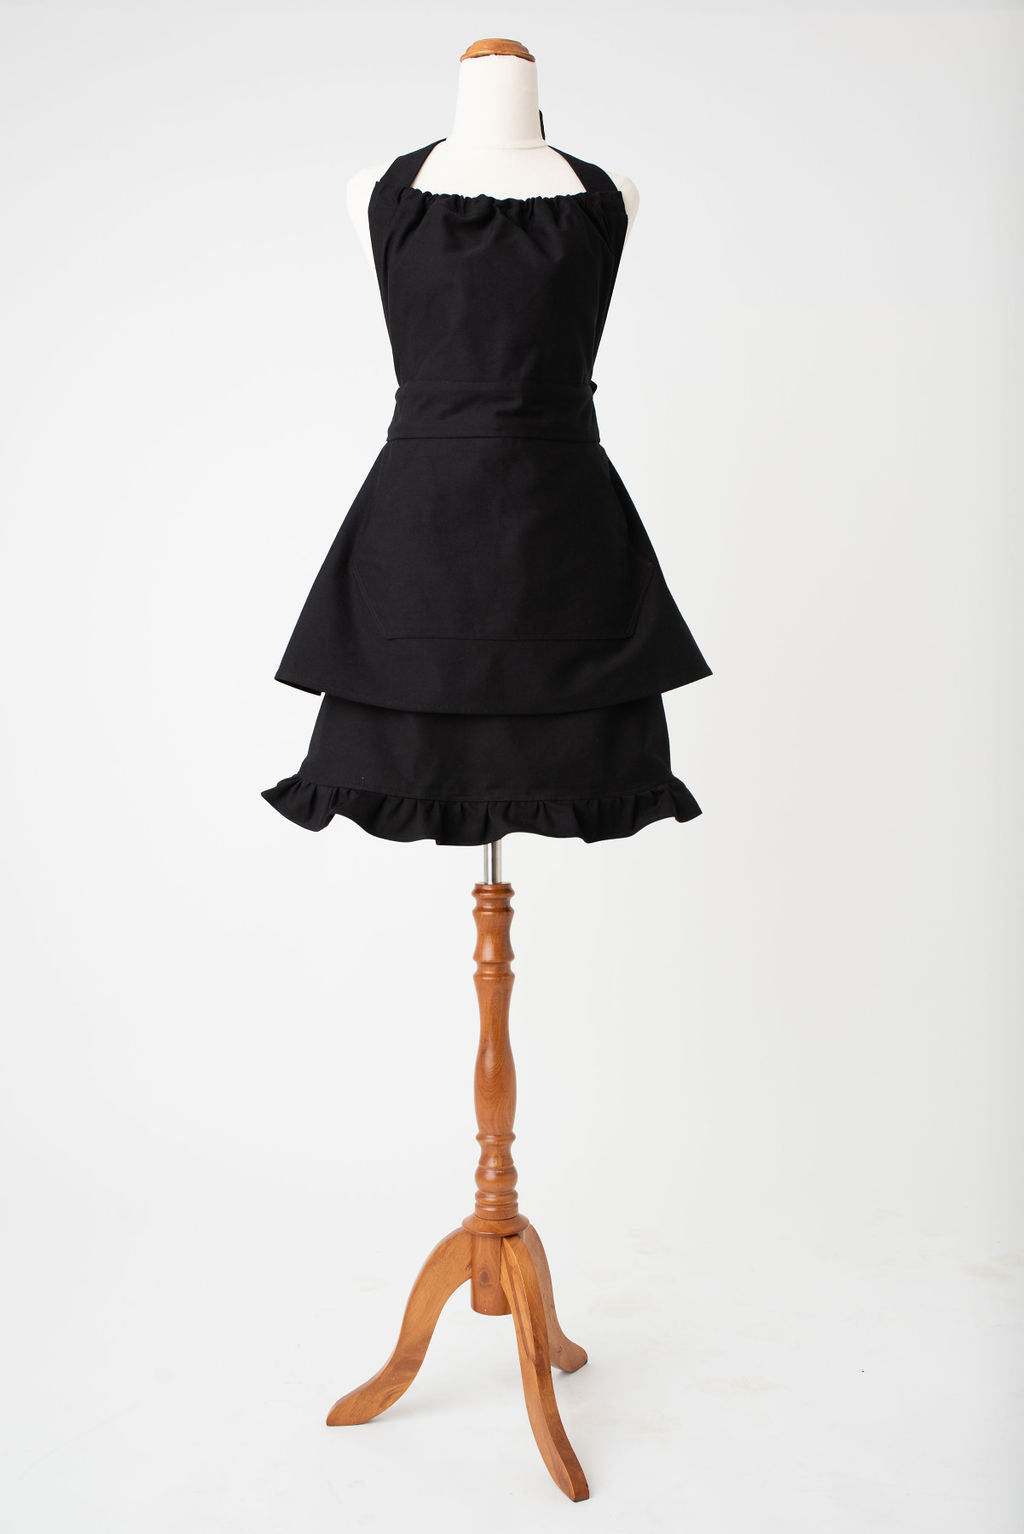 High waist feminine hostess apron in black by Pretty Made - Front